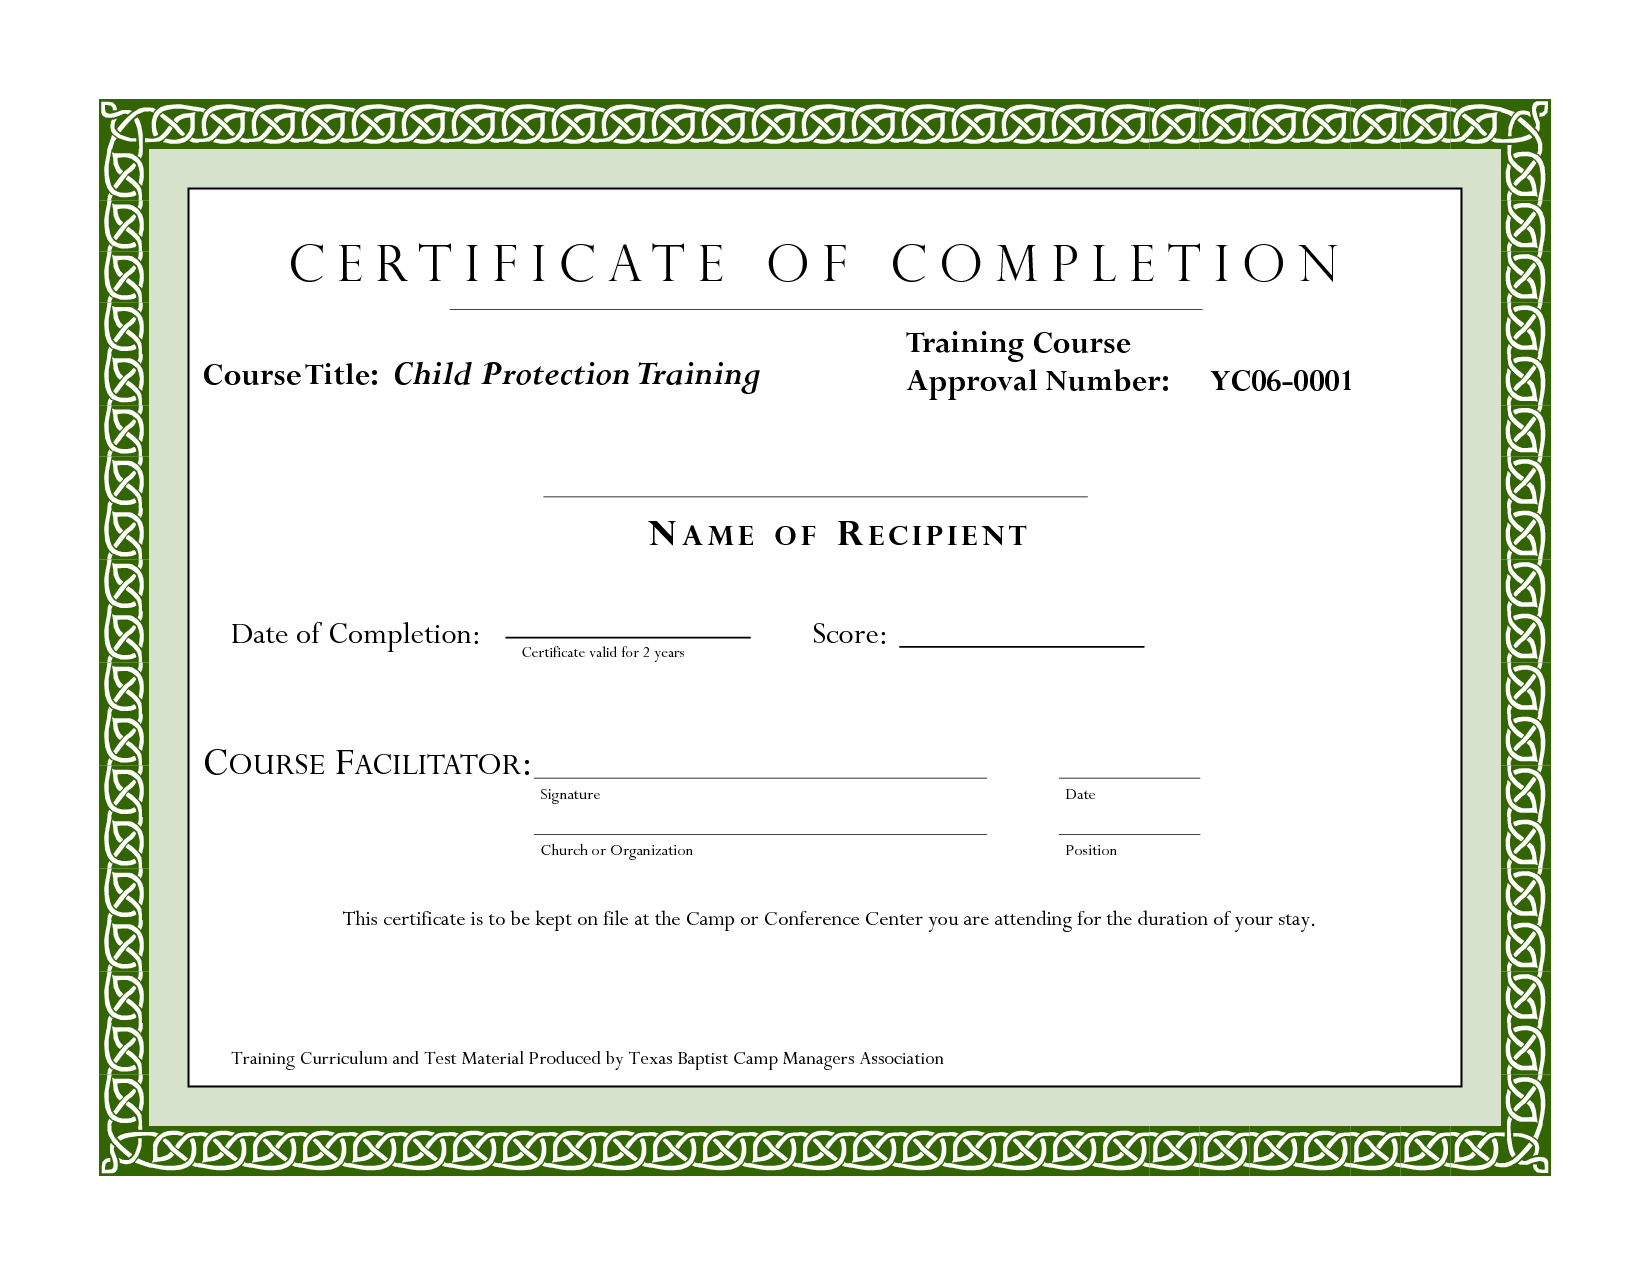 Course Completion Certificate Template | Certificate Of Within Free Training Completion Certificate Templates